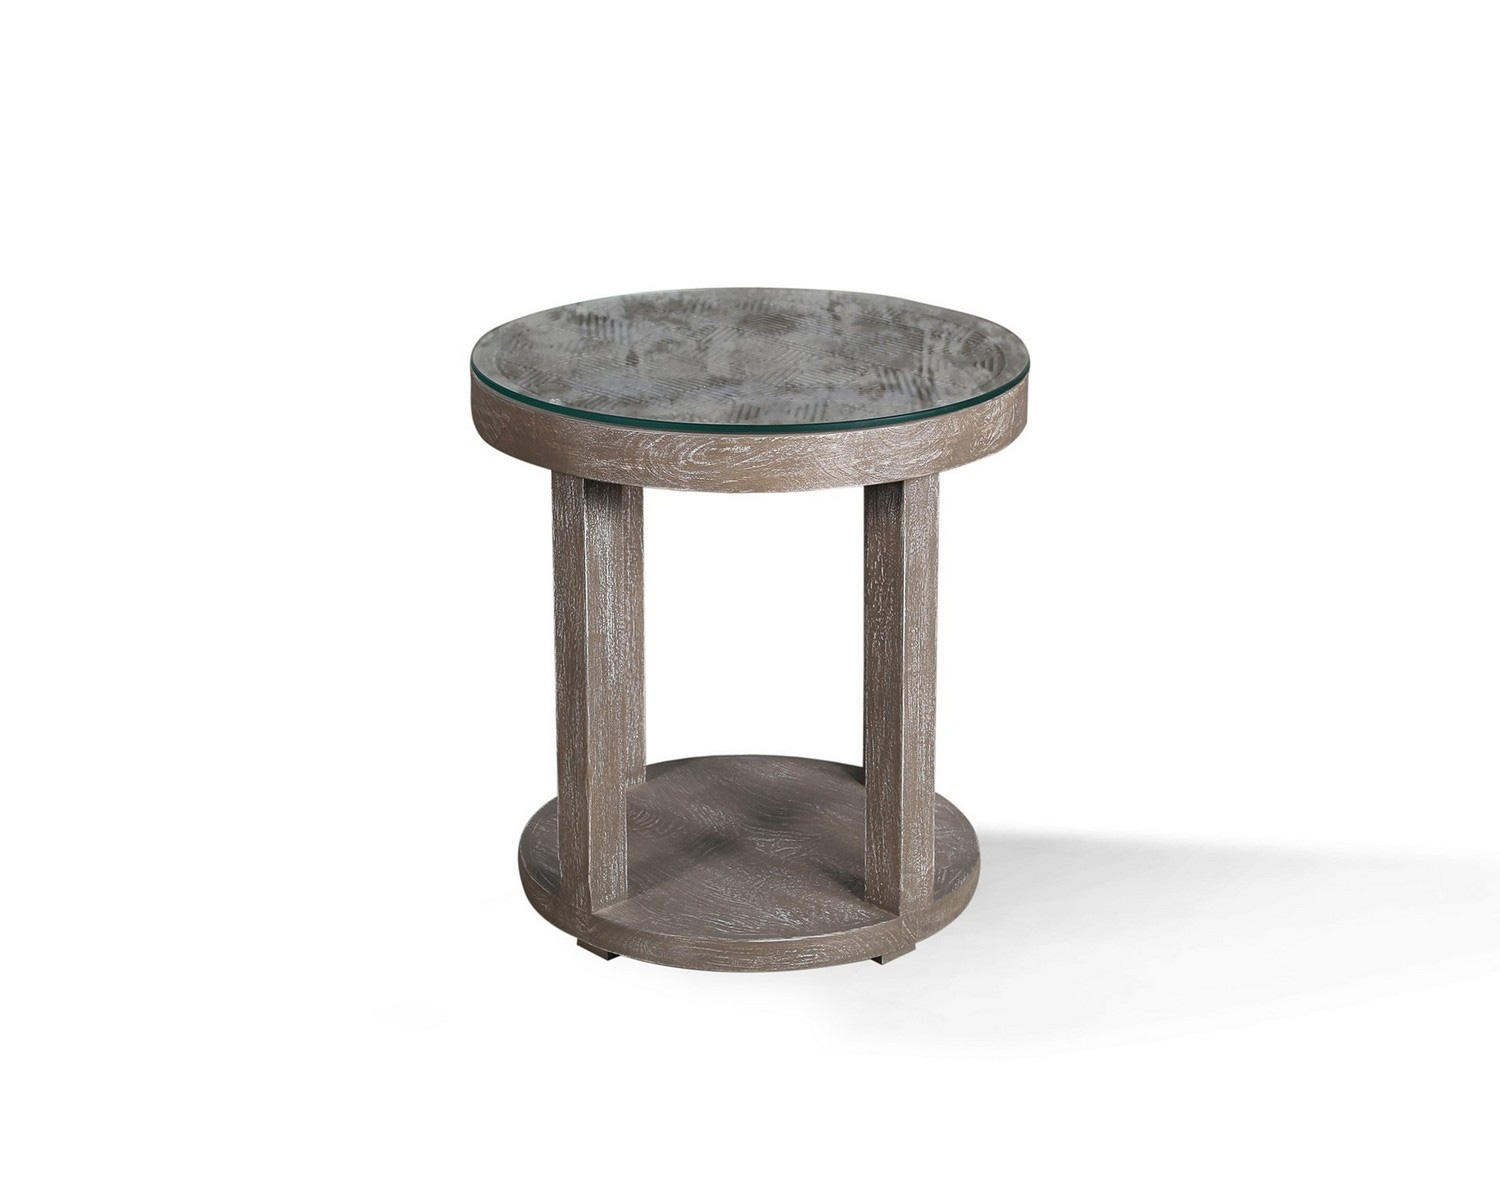 Parker House Crossings Serengeti Round End Table with Glass Top - Sandblasted Fossil Grey